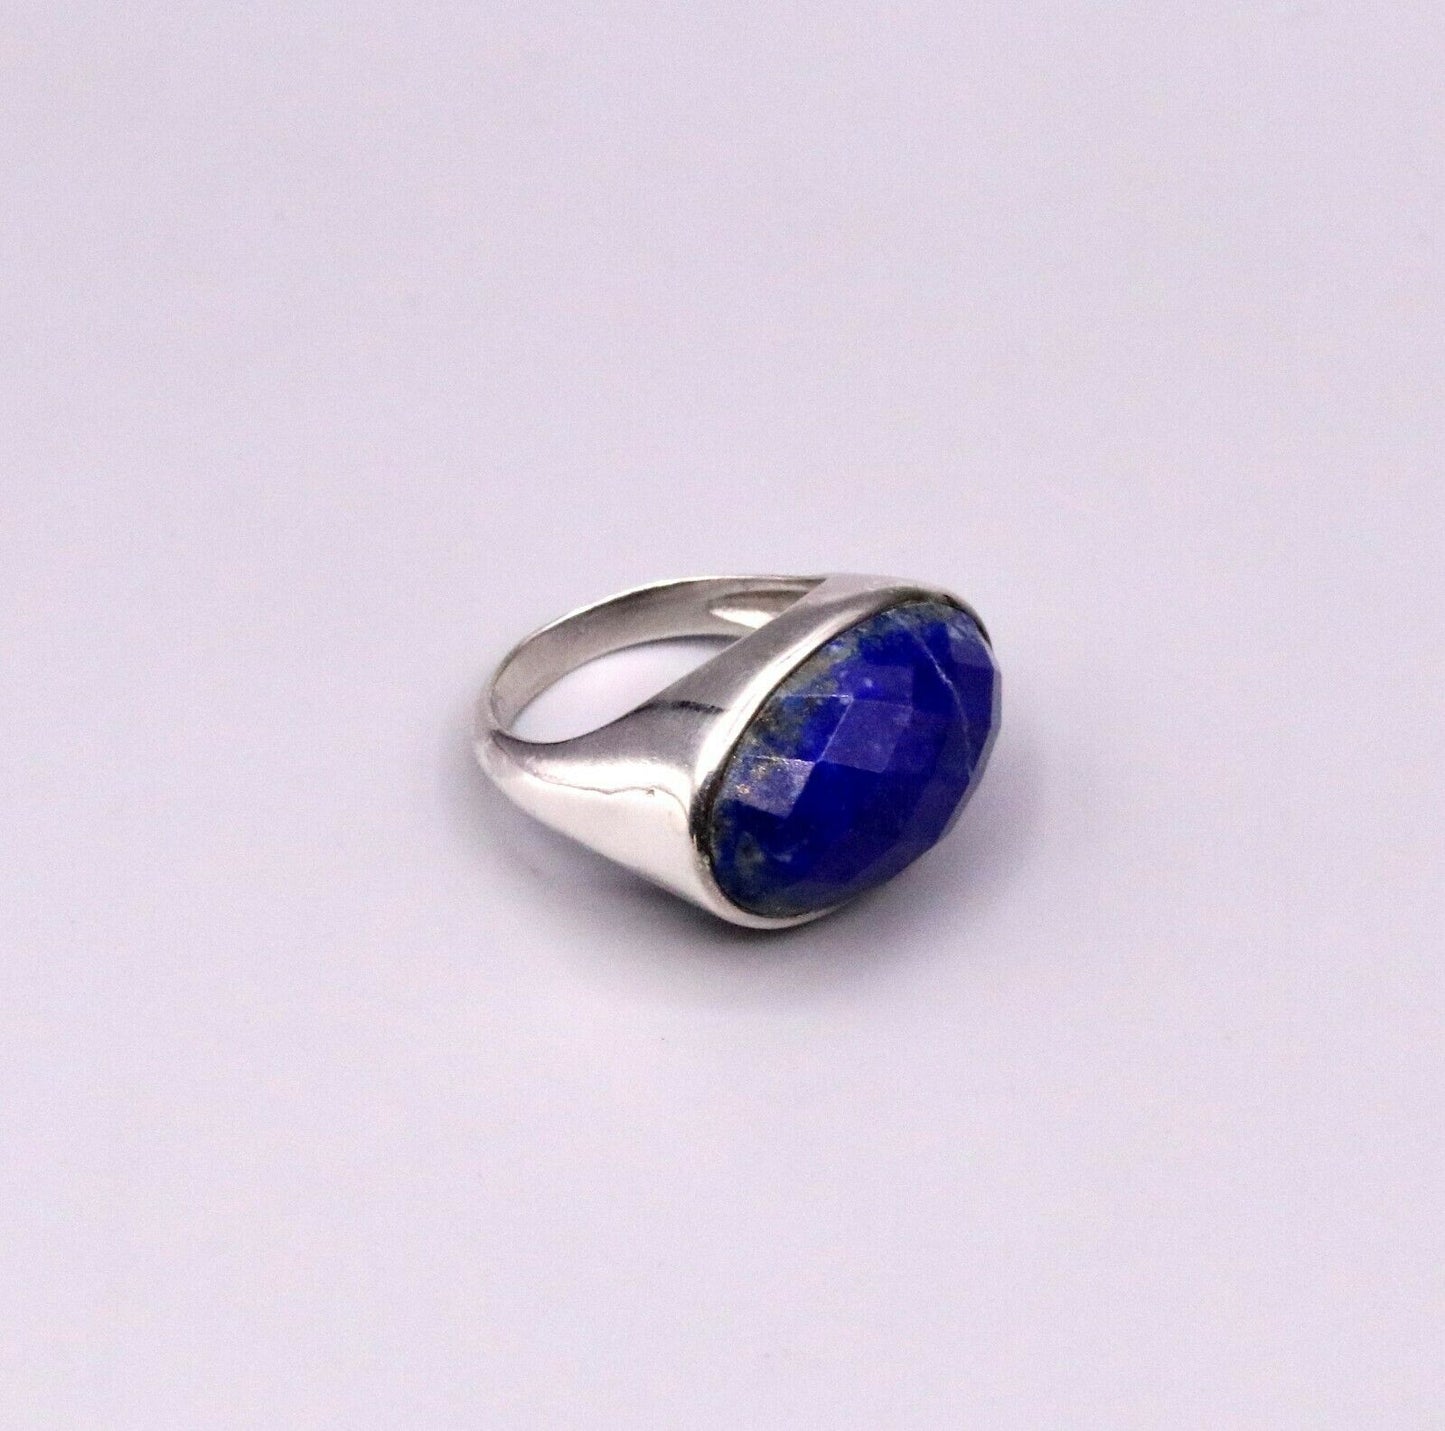 SIMULATED SAPPHIRE STONE 925 SOLID SILVER UNISEX RING BAND INDIA JEWELRY sr88 - TRIBAL ORNAMENTS